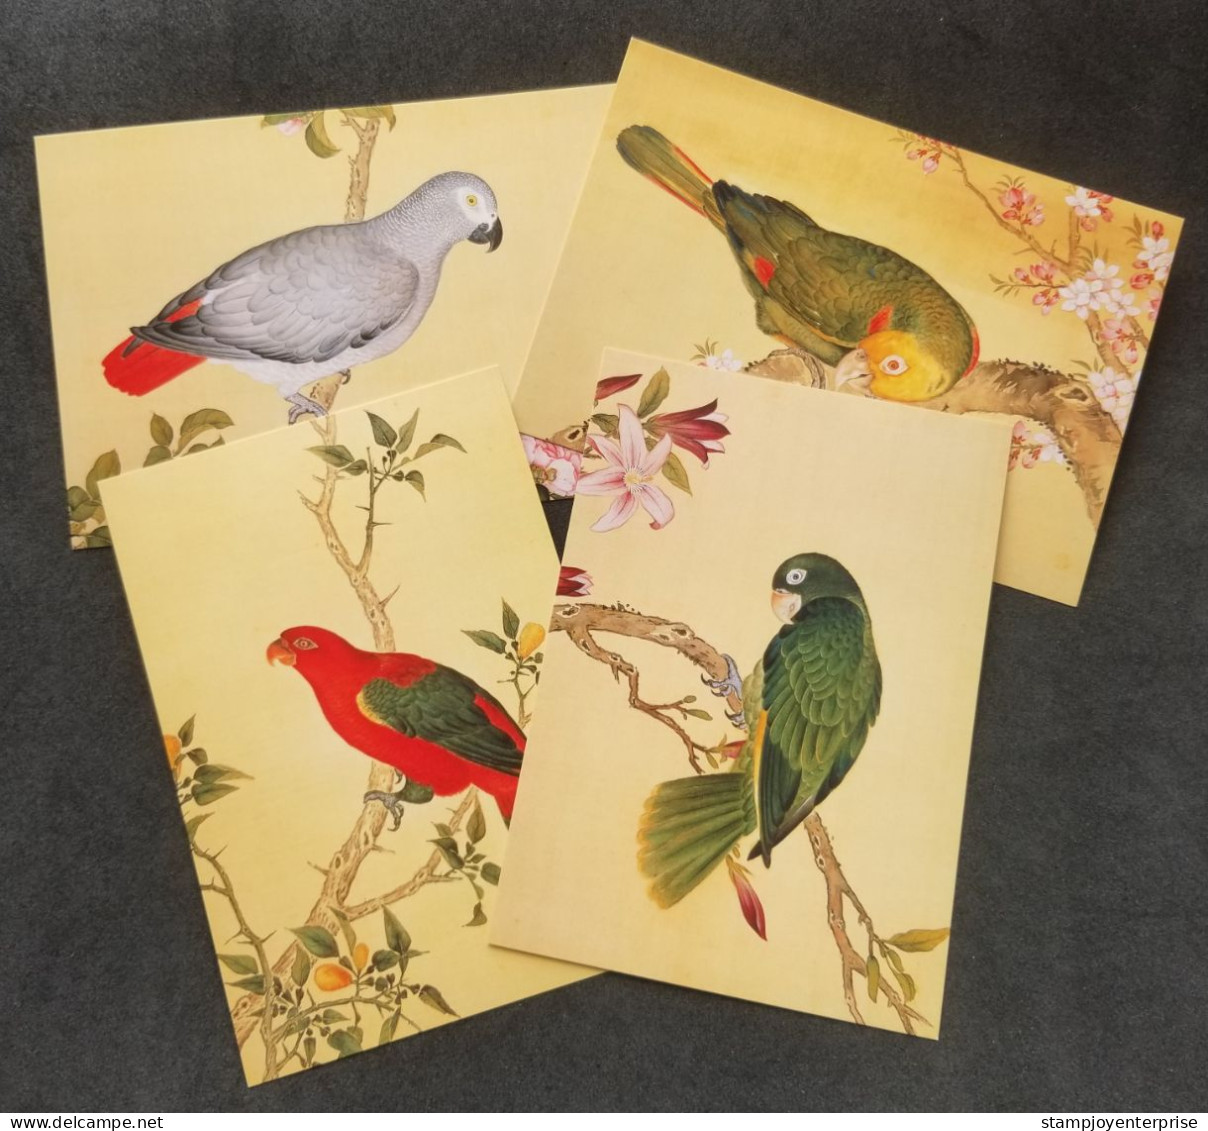 Taiwan National Palace Museum Bird Manual 1999 Chinese Ancient Painting Flower Tree Birds Parrot (postcard) MNH - Covers & Documents